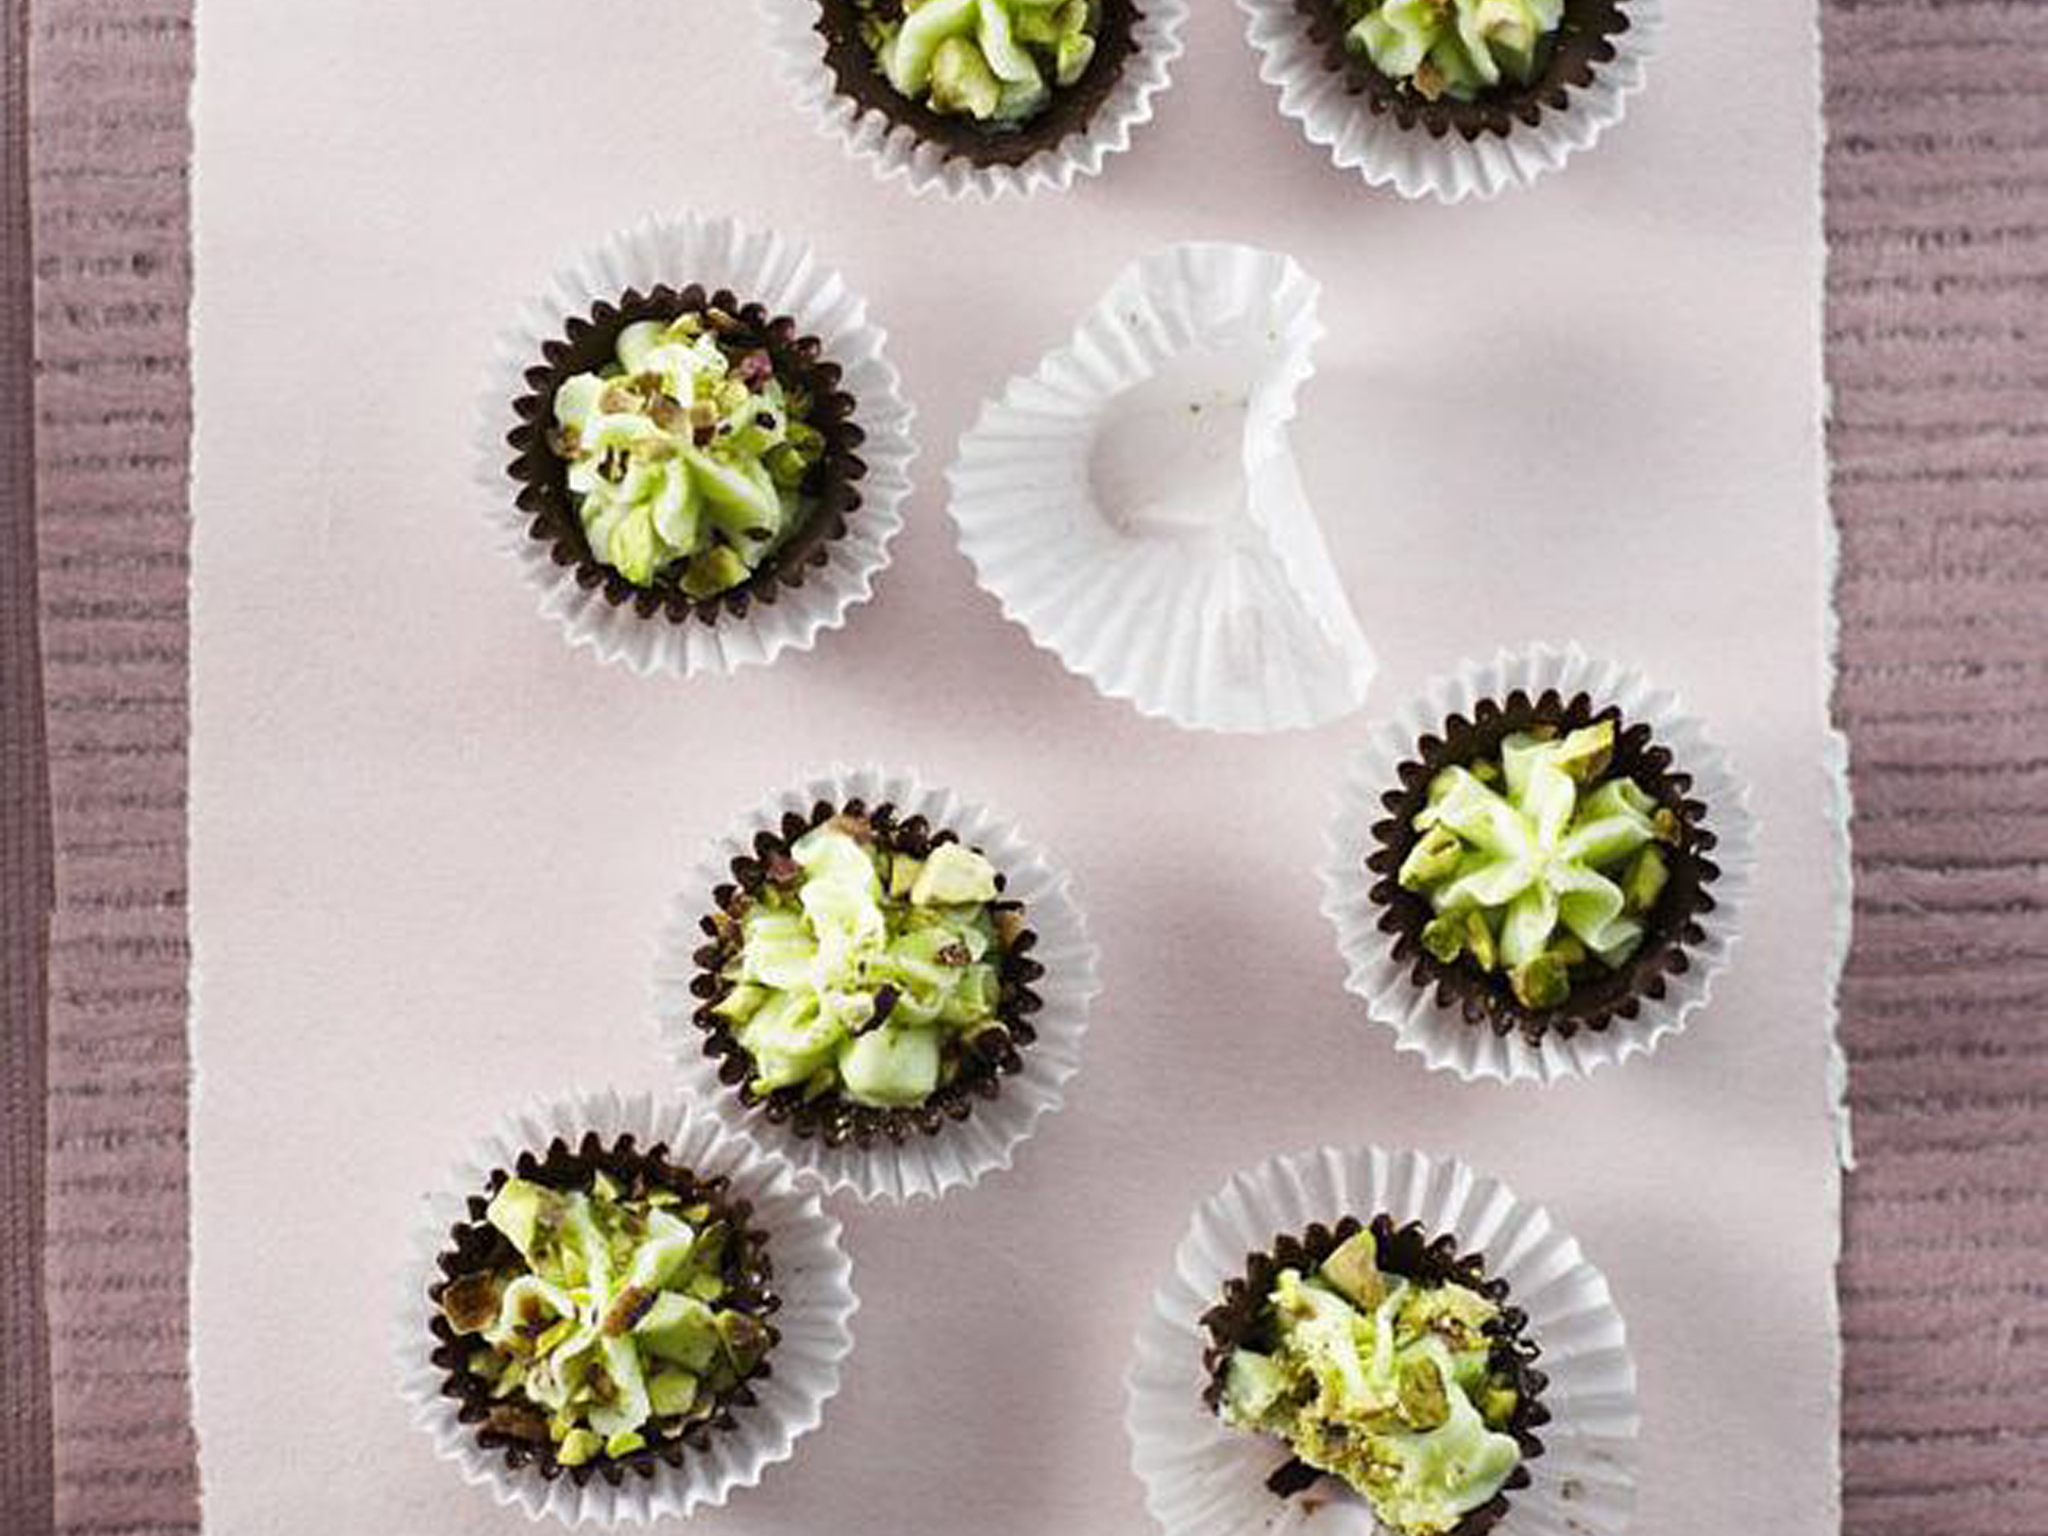 MINTED CHOCOLATE CREAMS